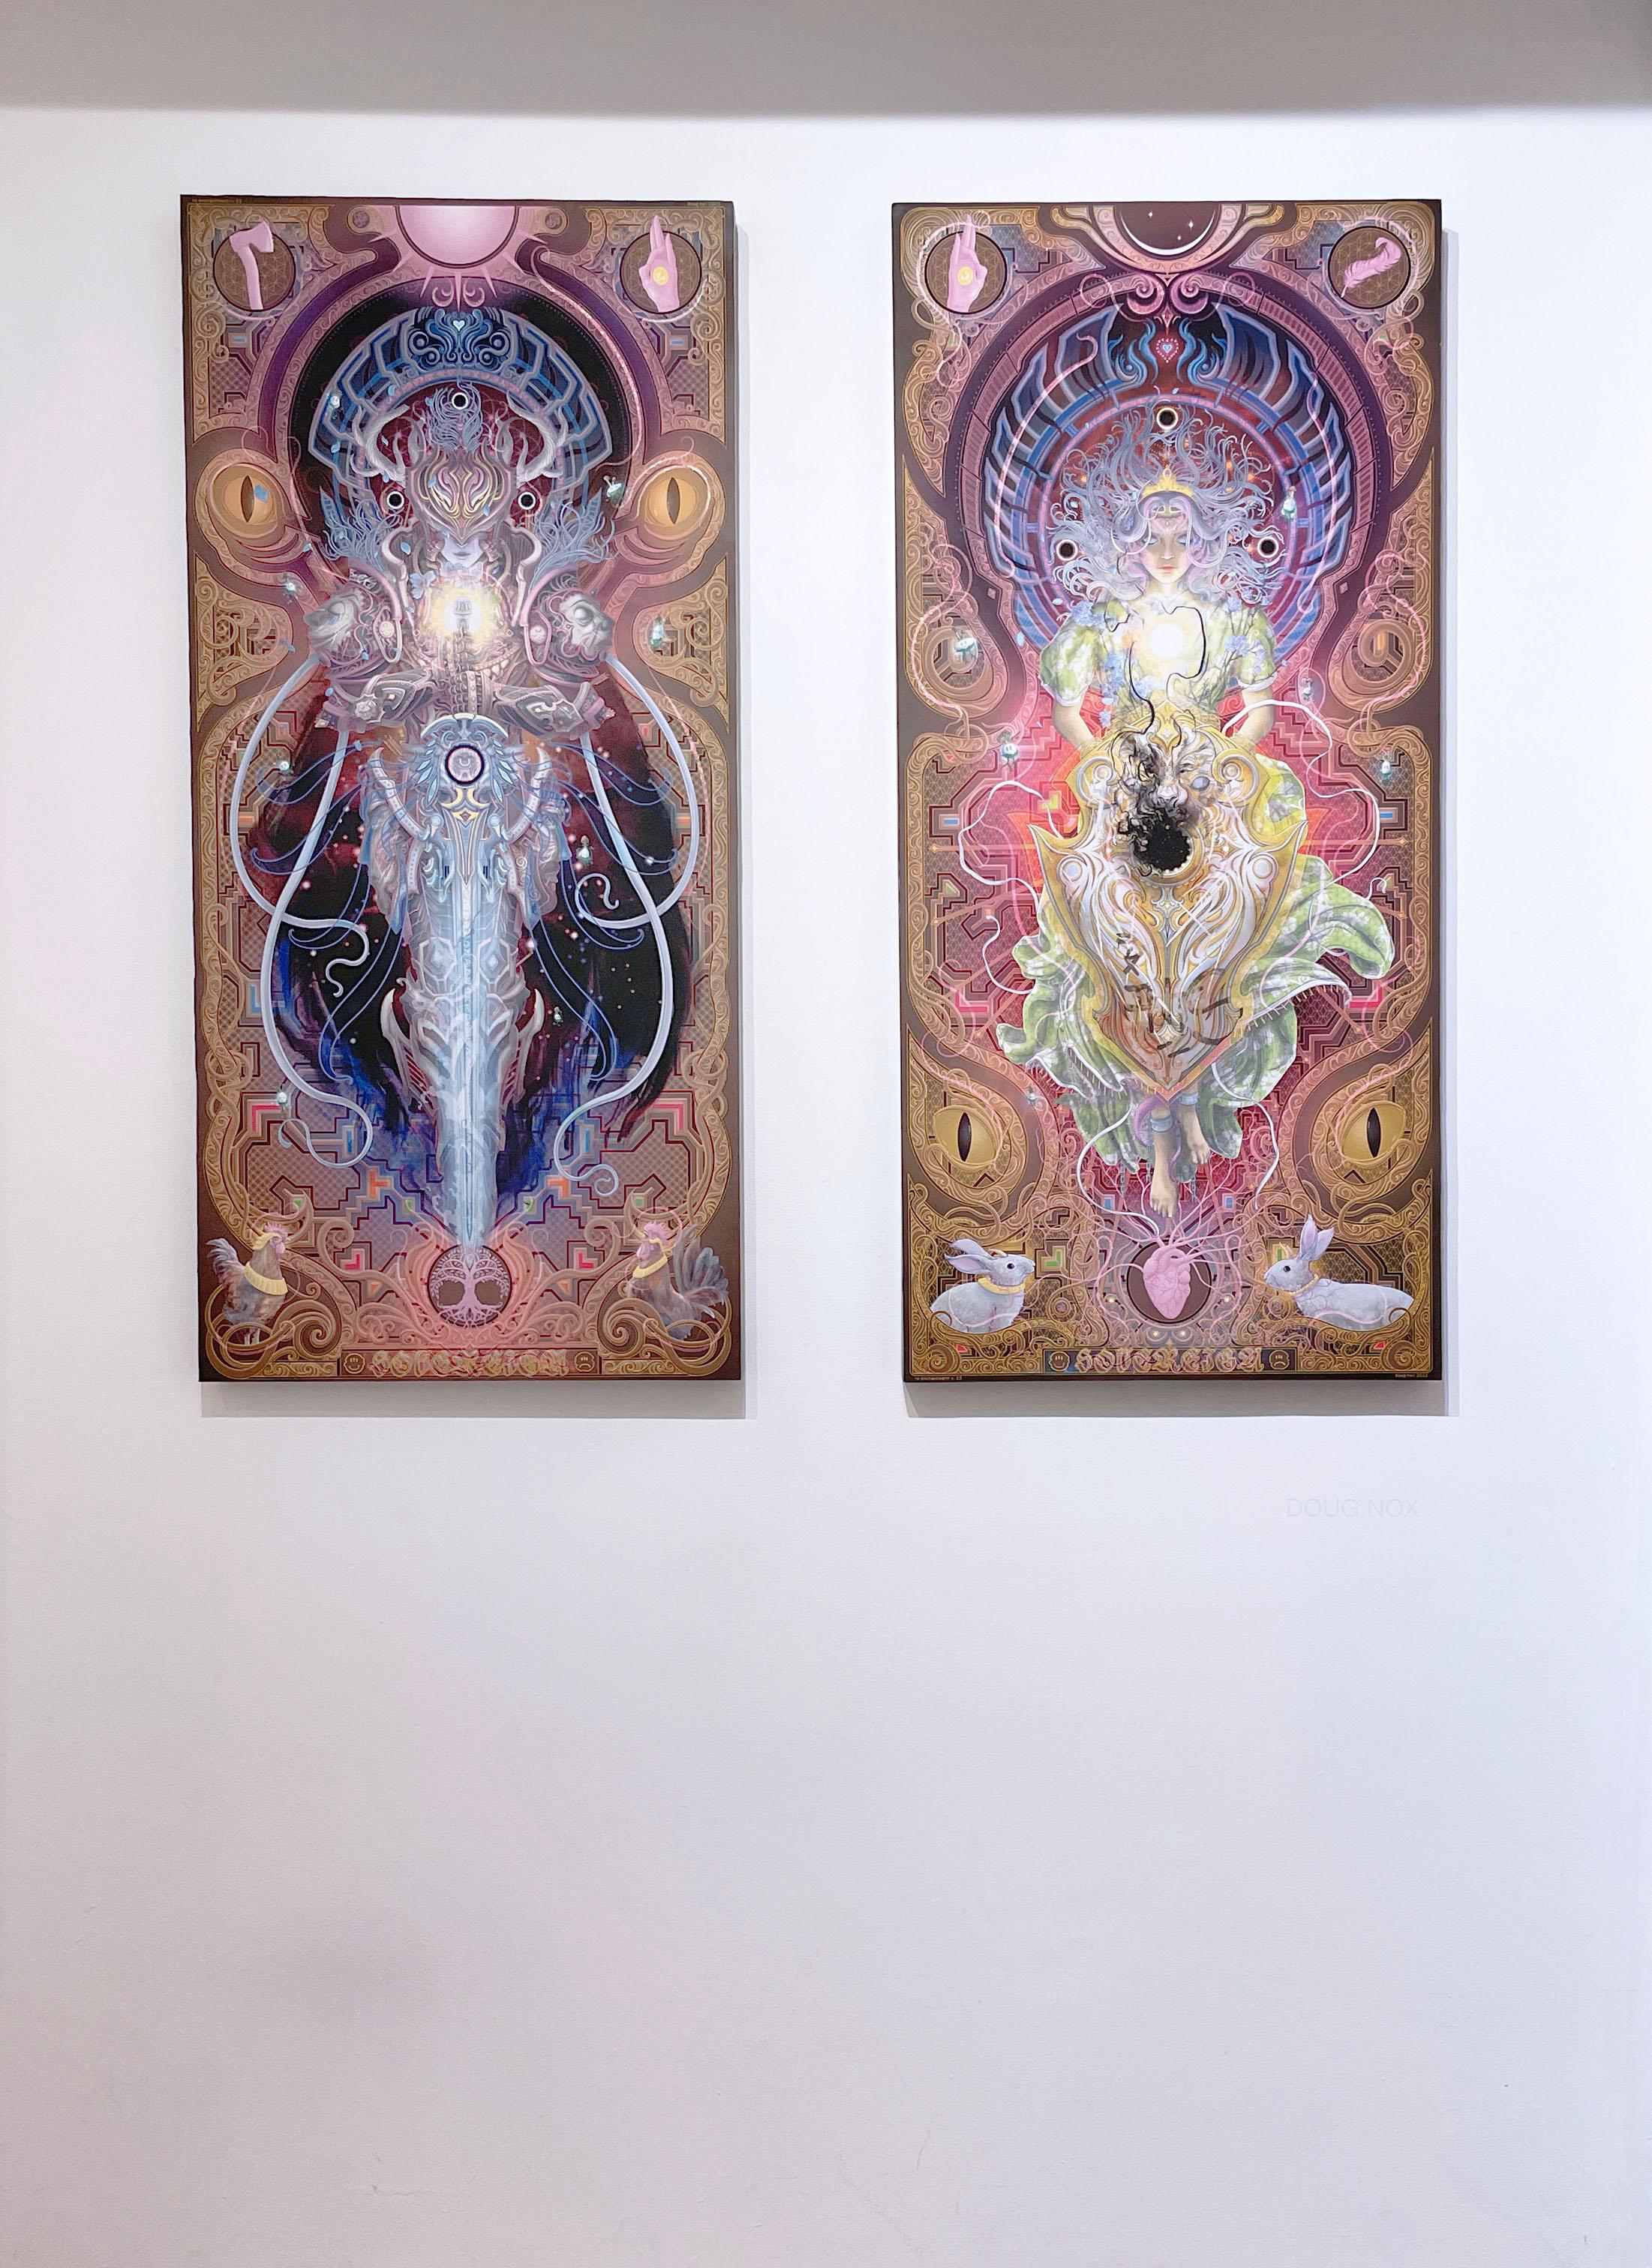 Sovereign Shield (2022) by Doug Nox (Harlequinade), psychedelic, cosmic, giclée For Sale 2